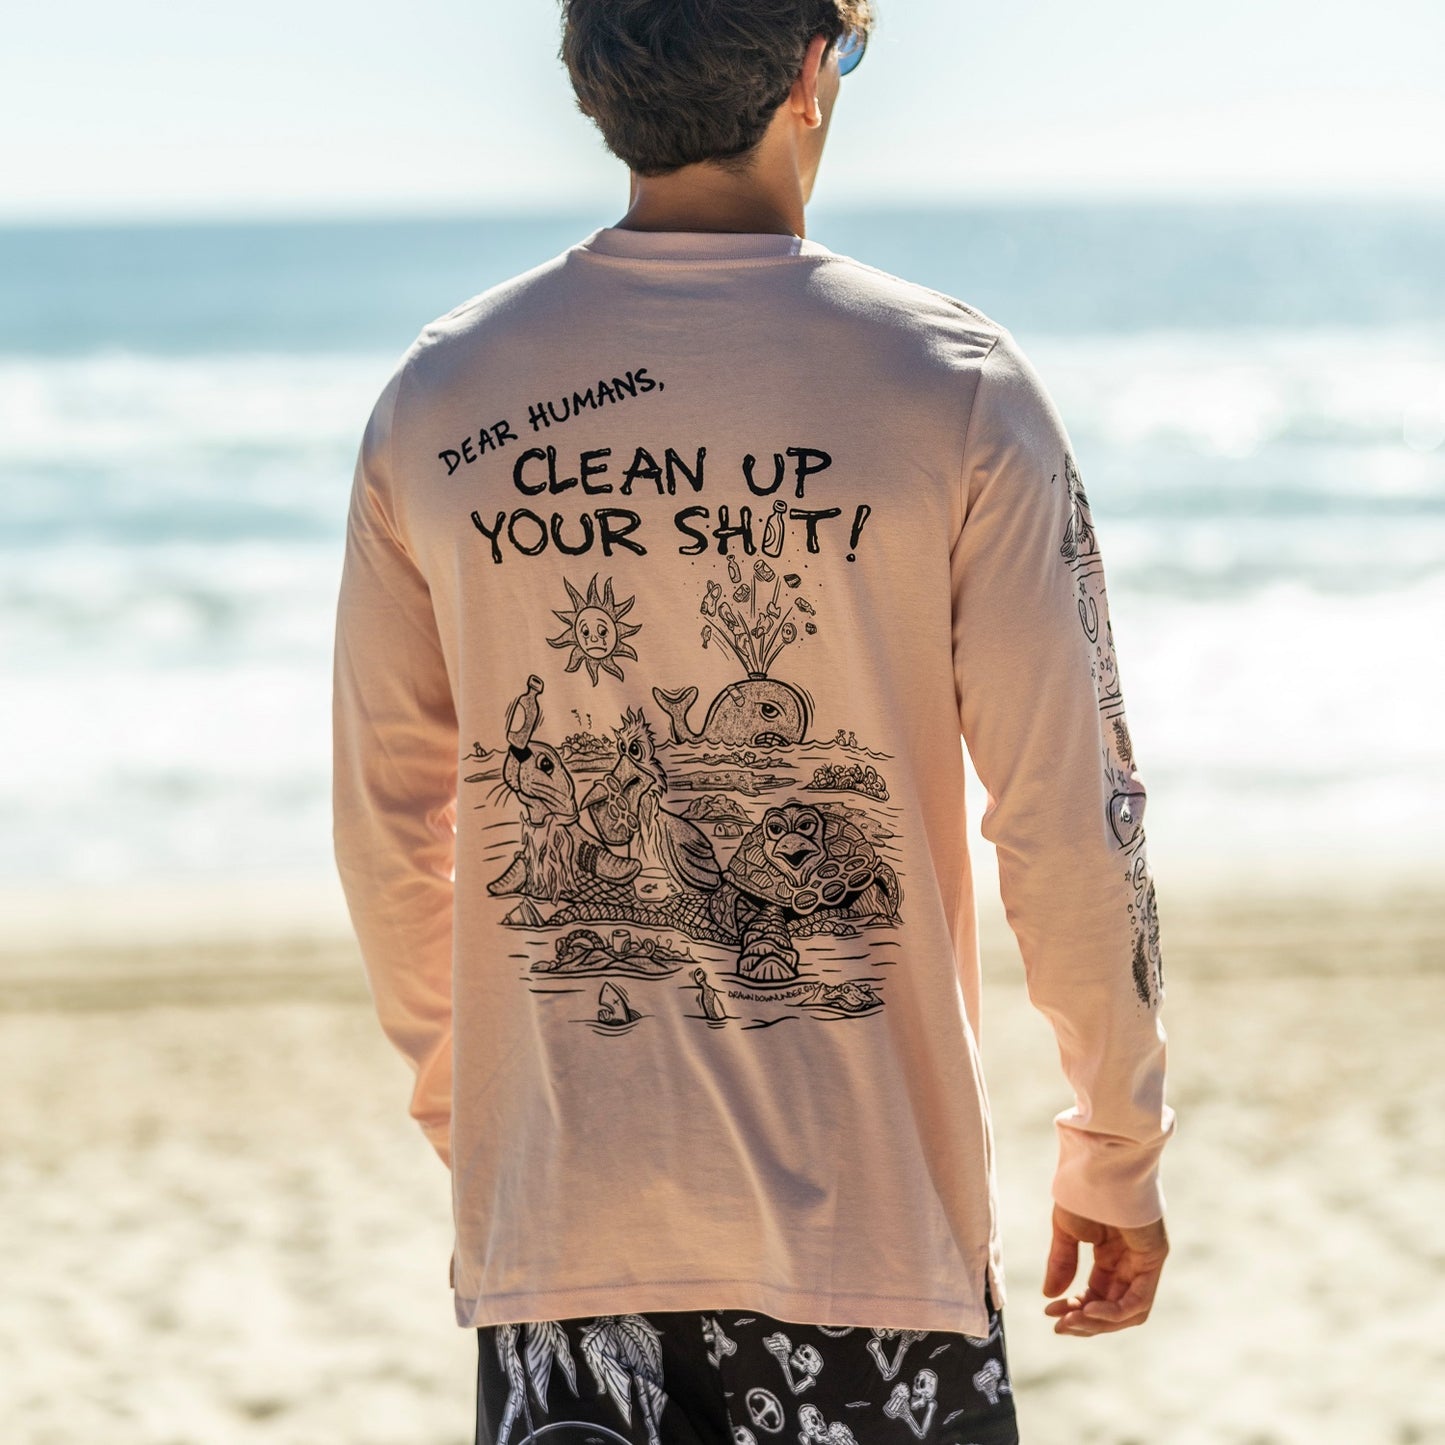 Clean Up Your Sh!t Long Sleeve